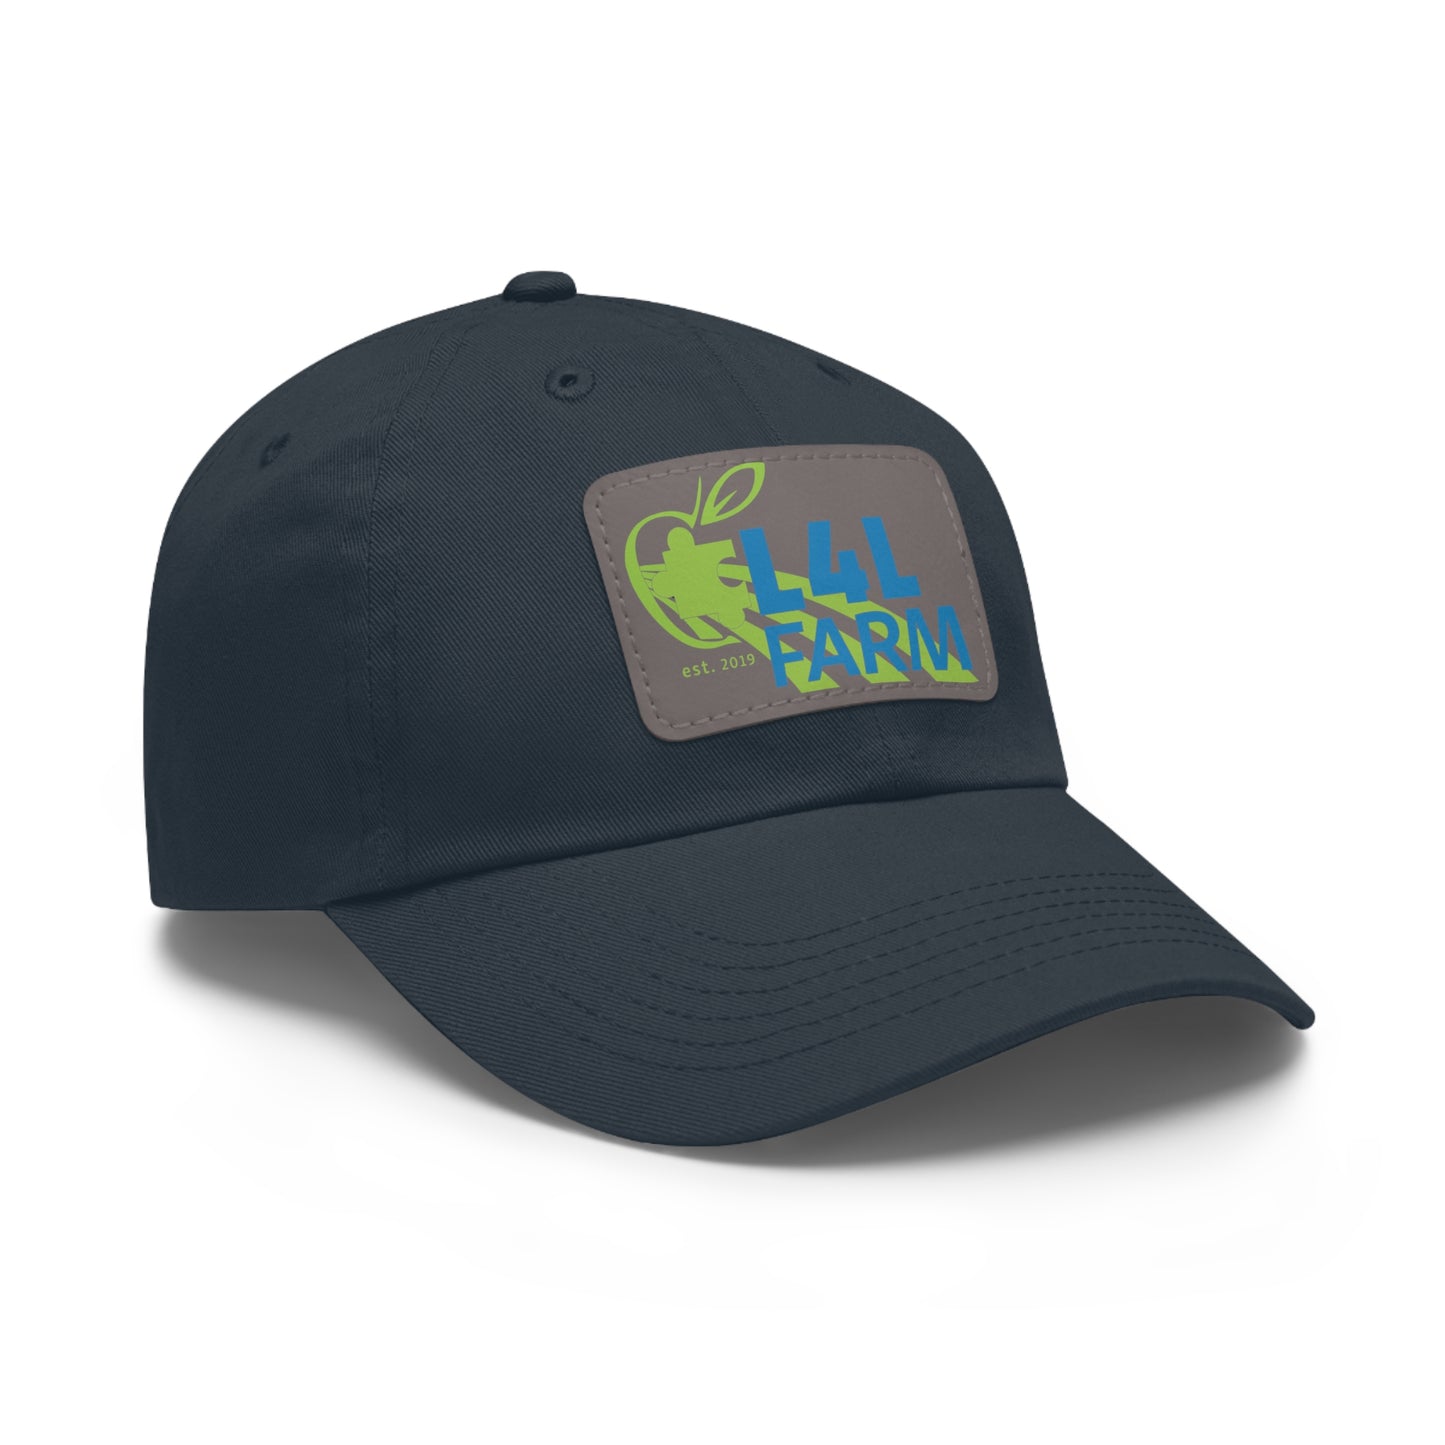 L4L Farm Dad Hat with Leather Patch (Rectangle)